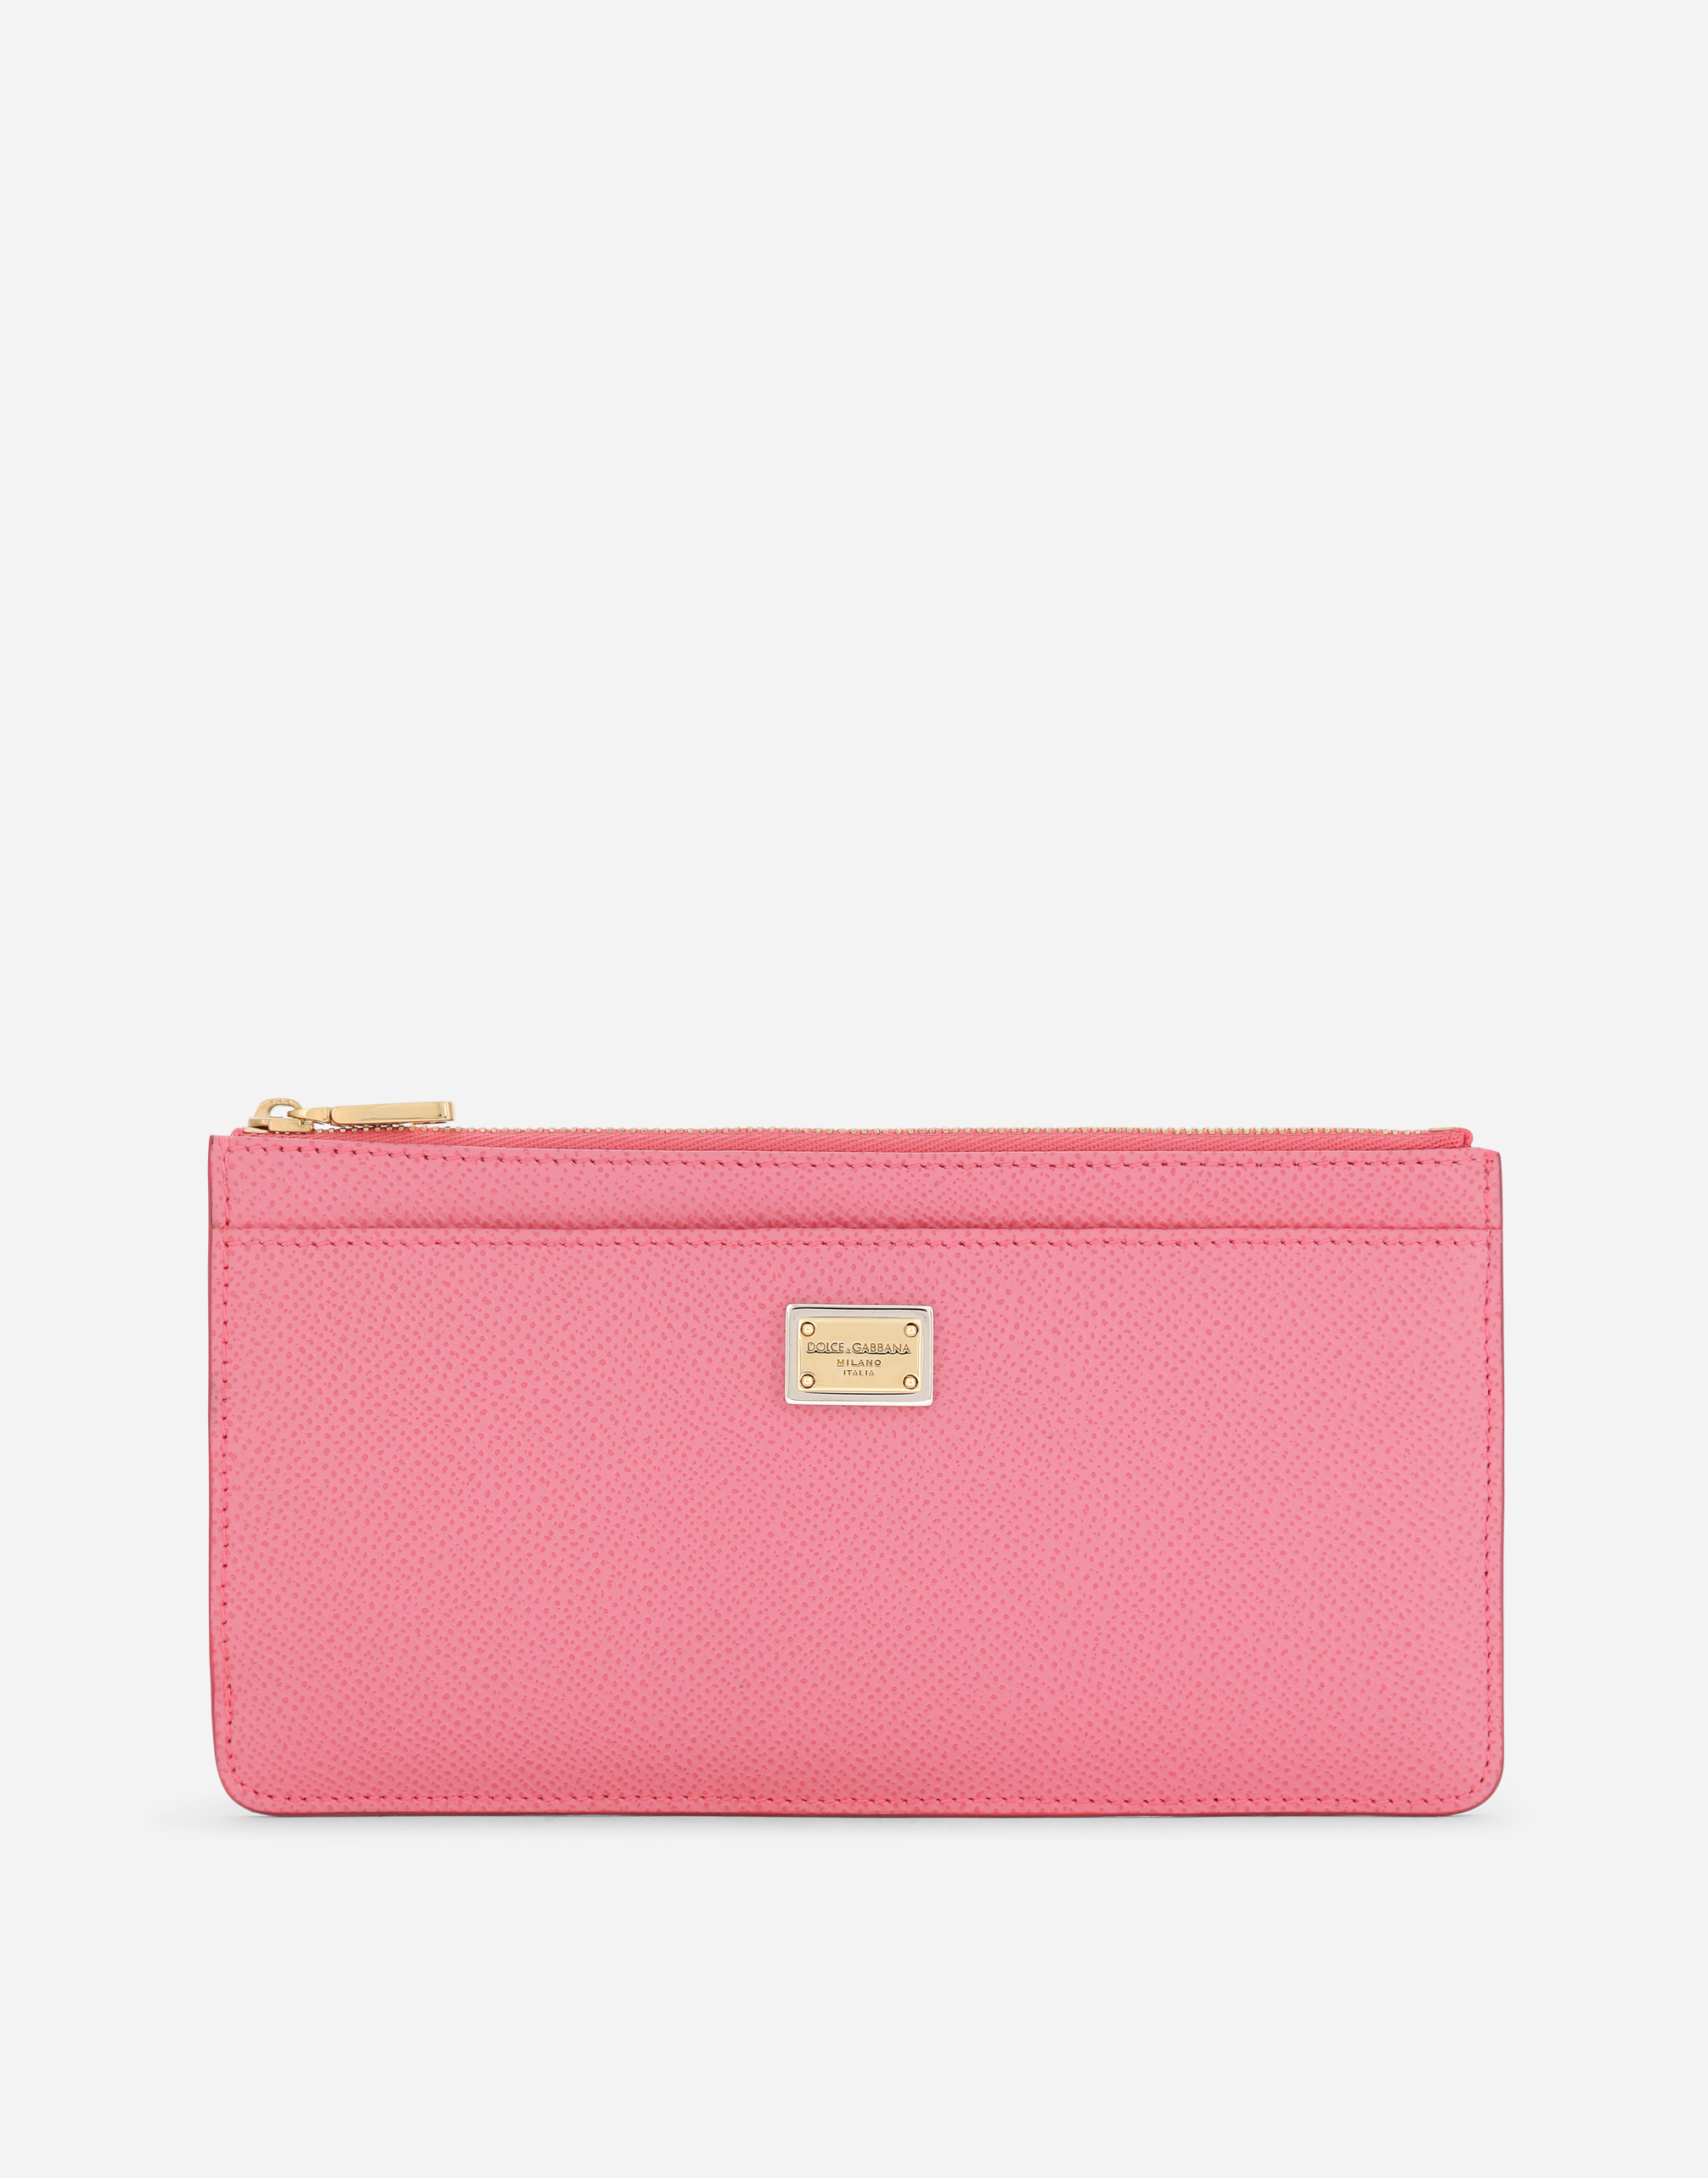 Large card holder with tag in Pink for Women | Dolce&Gabbana®